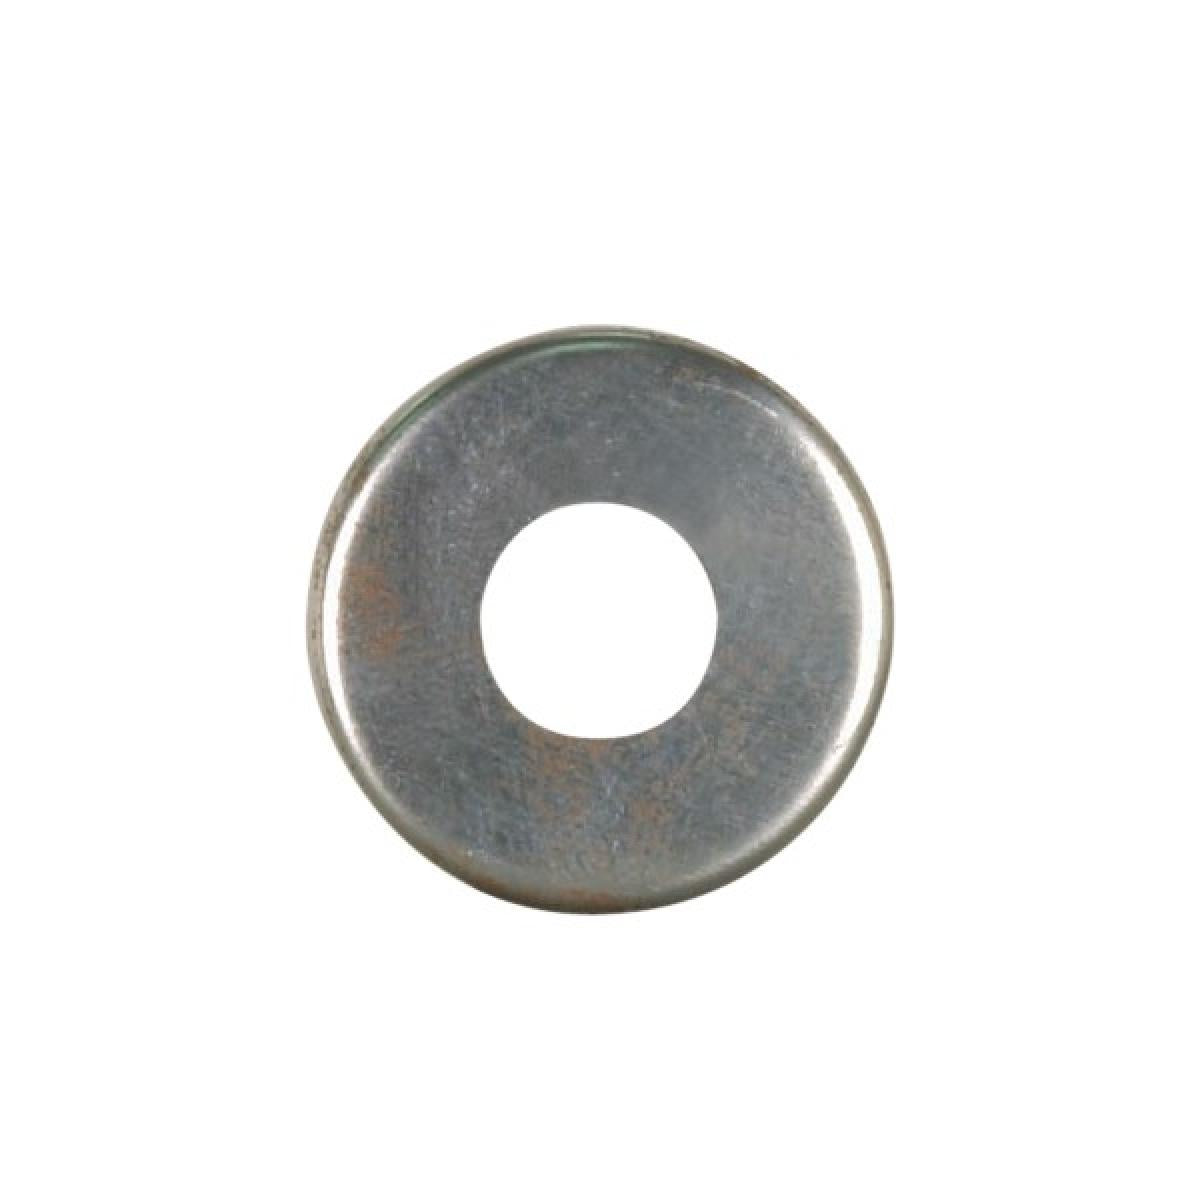 Satco 90-2076 Steel Check Ring Curled Edge 1/8 IP Slip Unfinished 2" Diameter